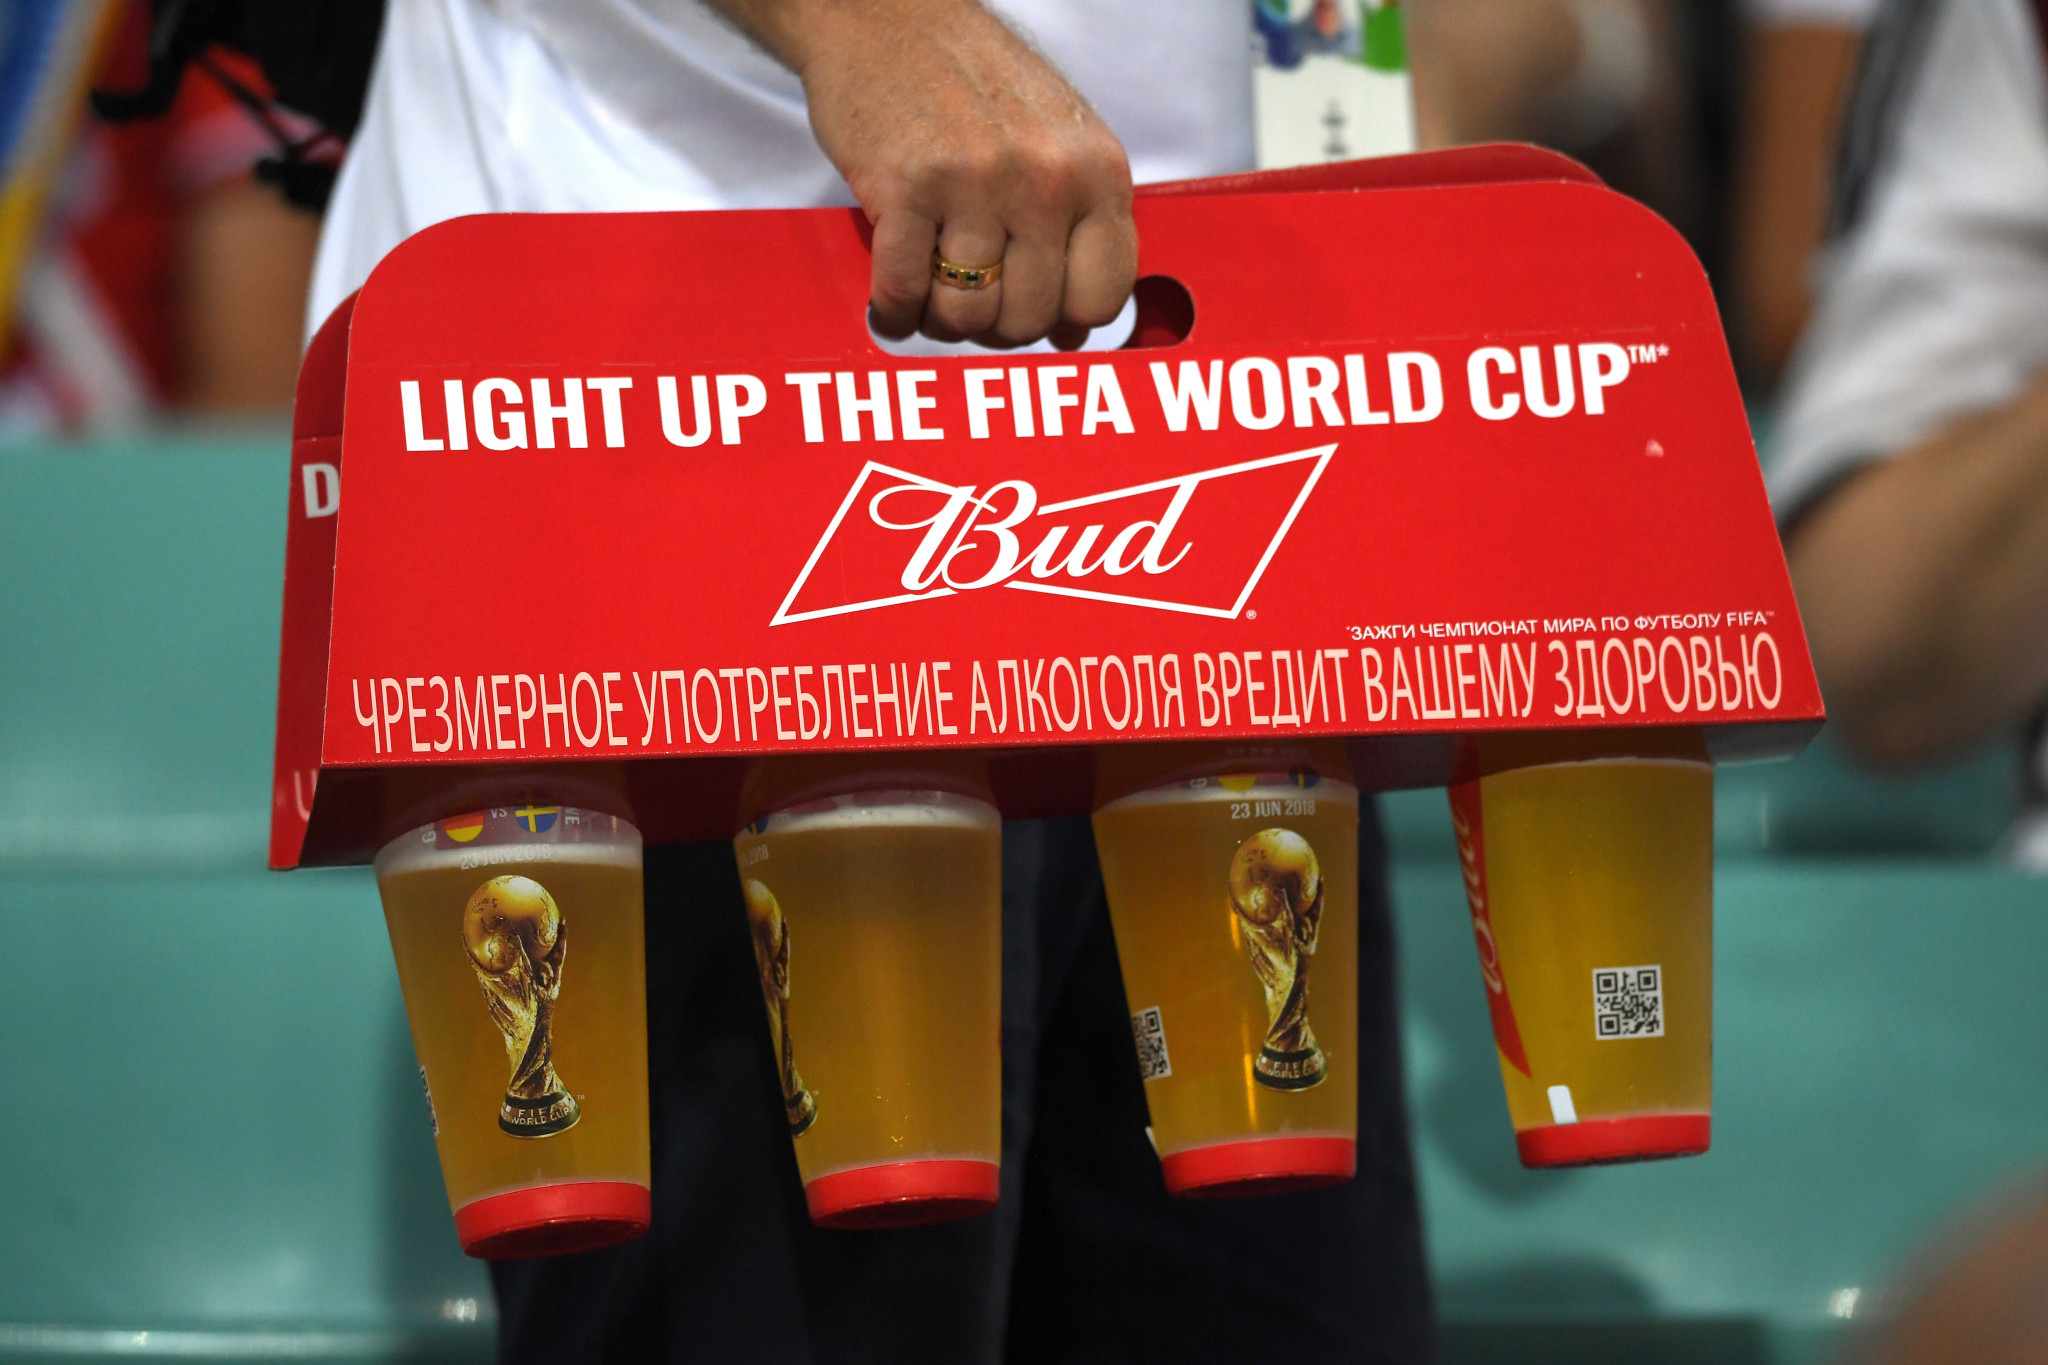 Public drunkenness is prohibited in Qatar, but the World Cup host nation has made a concession by allowing beer to be sold at fan zones prior to matches  ©Getty Images